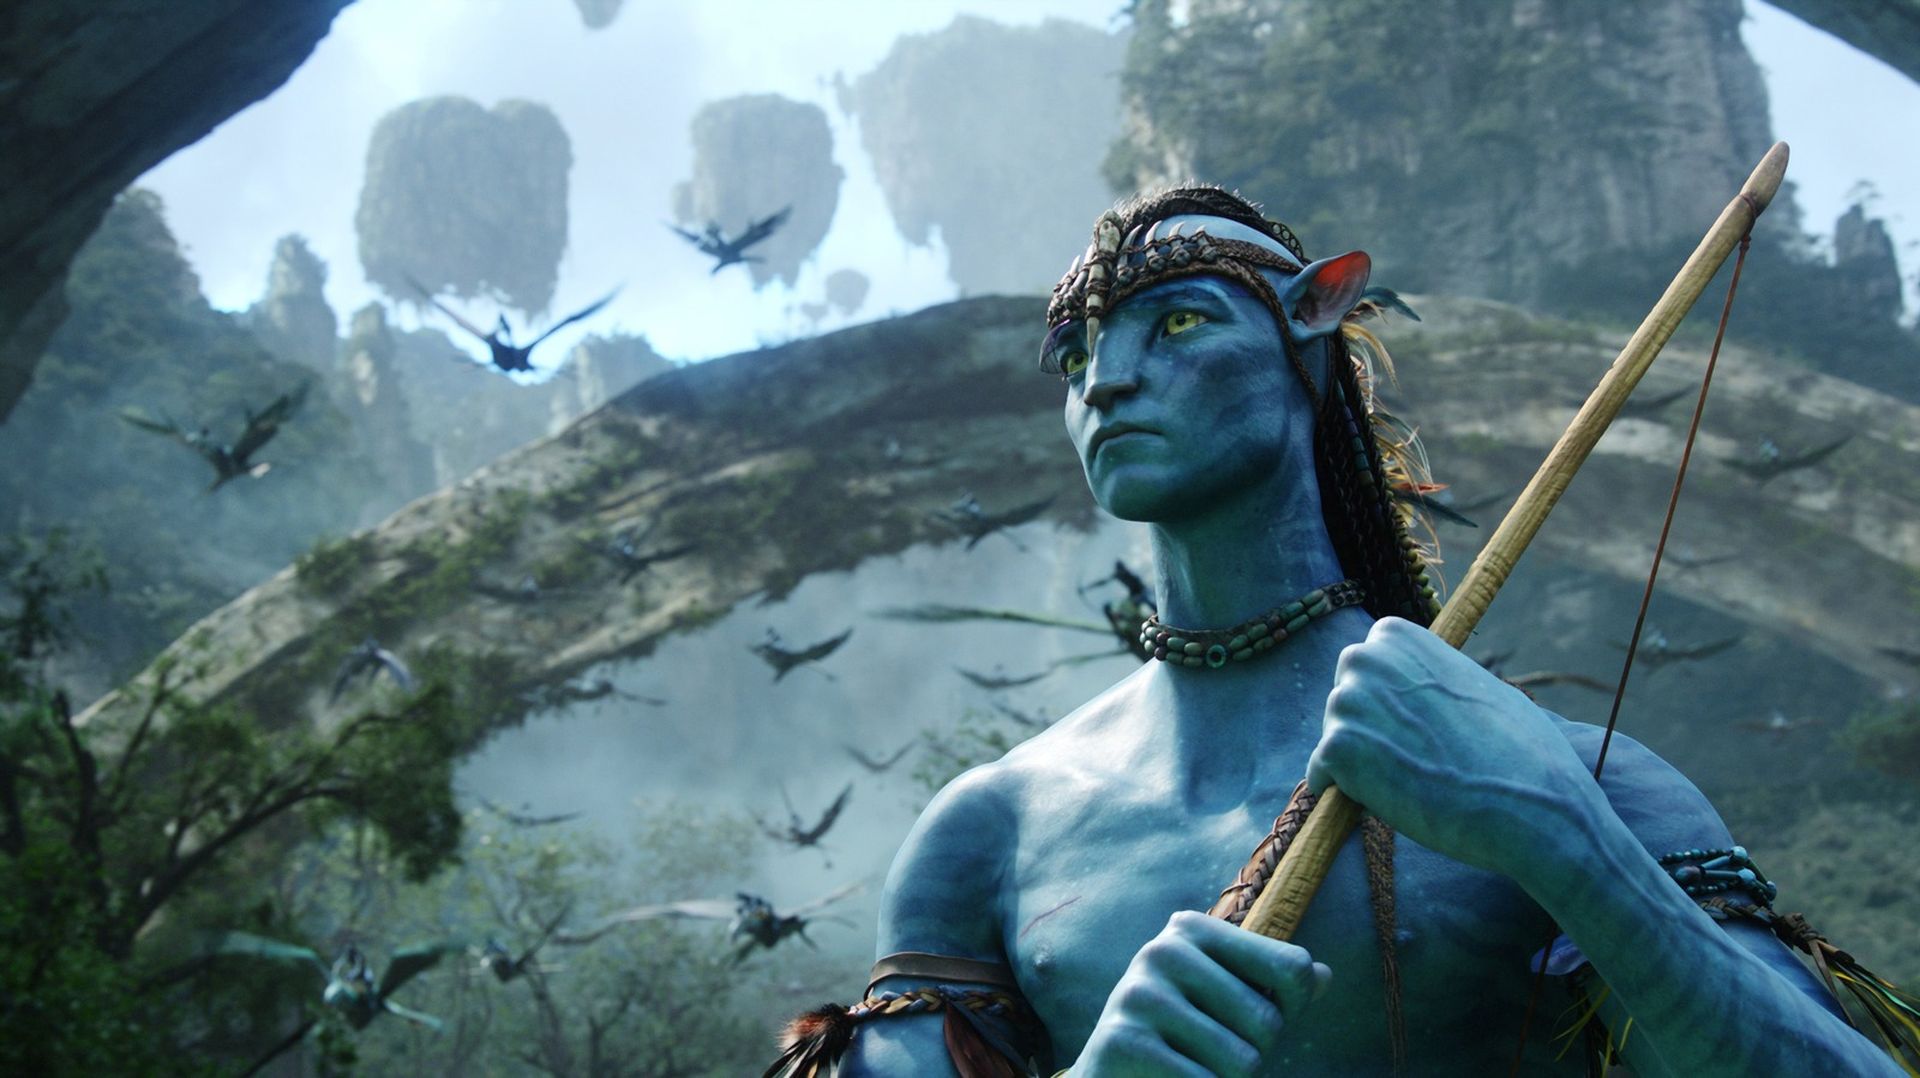 Disney announced on Wednesday at CinemaCon that the first Avatar sequel will be called Avatar: The Way of Water, suggesting that the delayed project is genuinely going to premiere on December 16th.